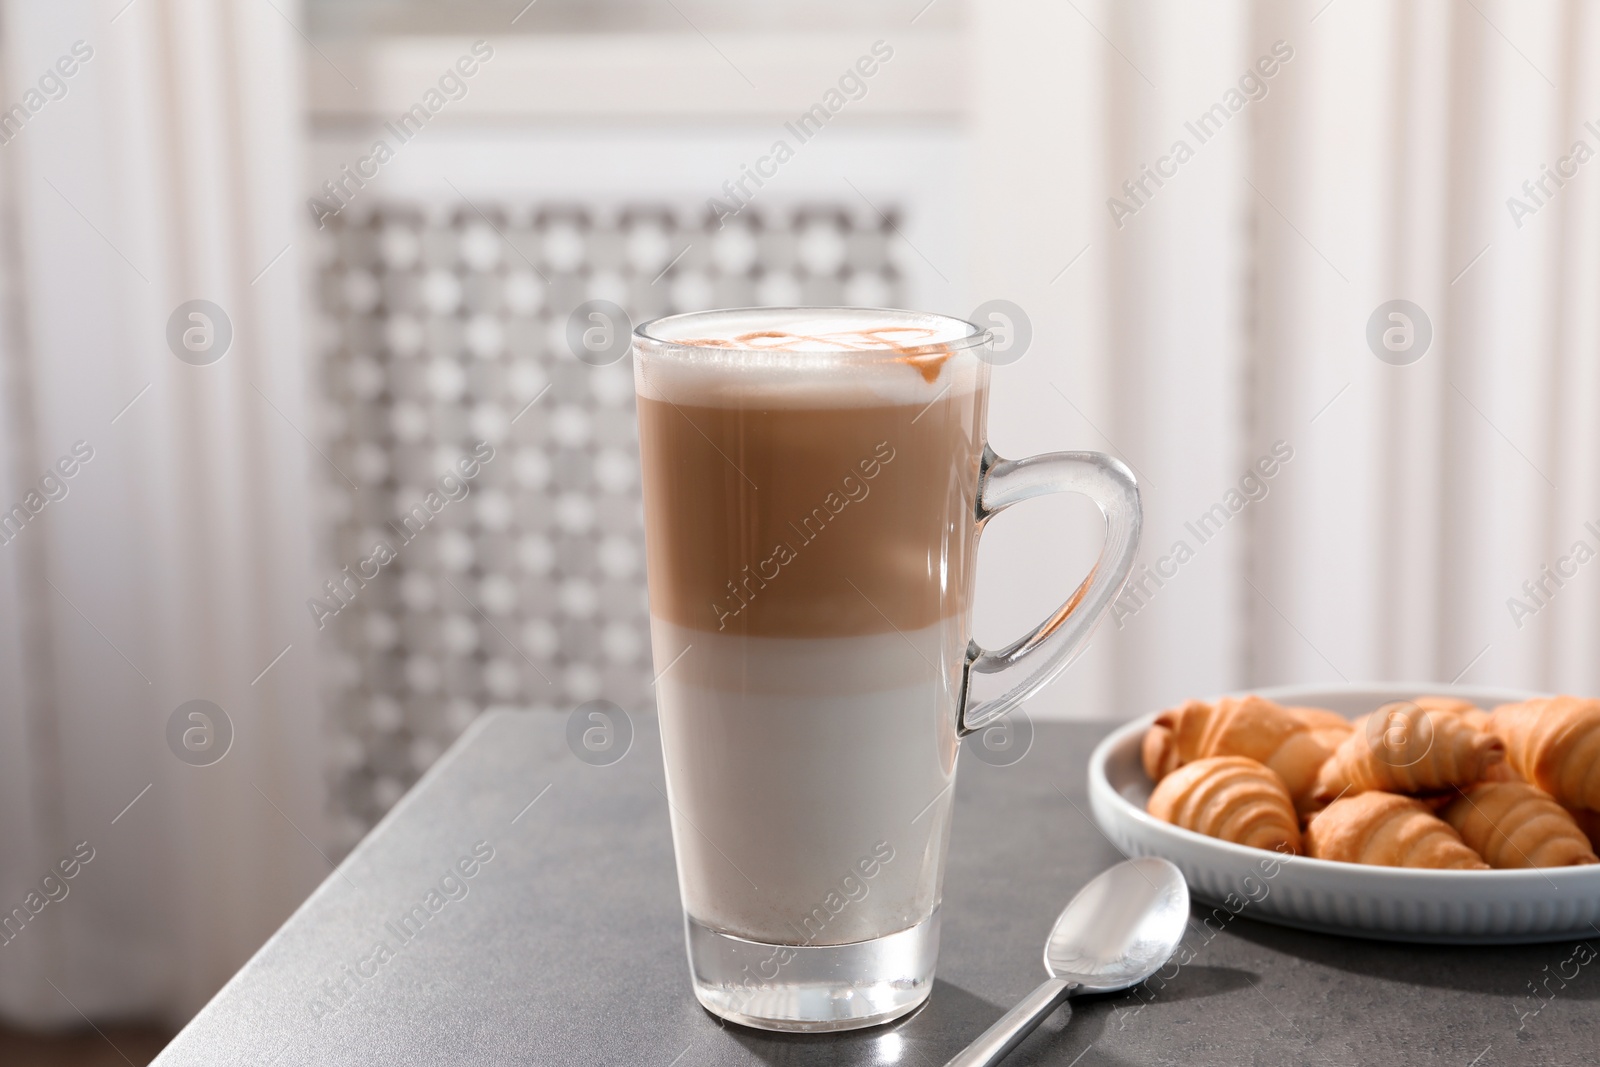 Photo of Glass cup of caramel macchiato and tasty pastry on table